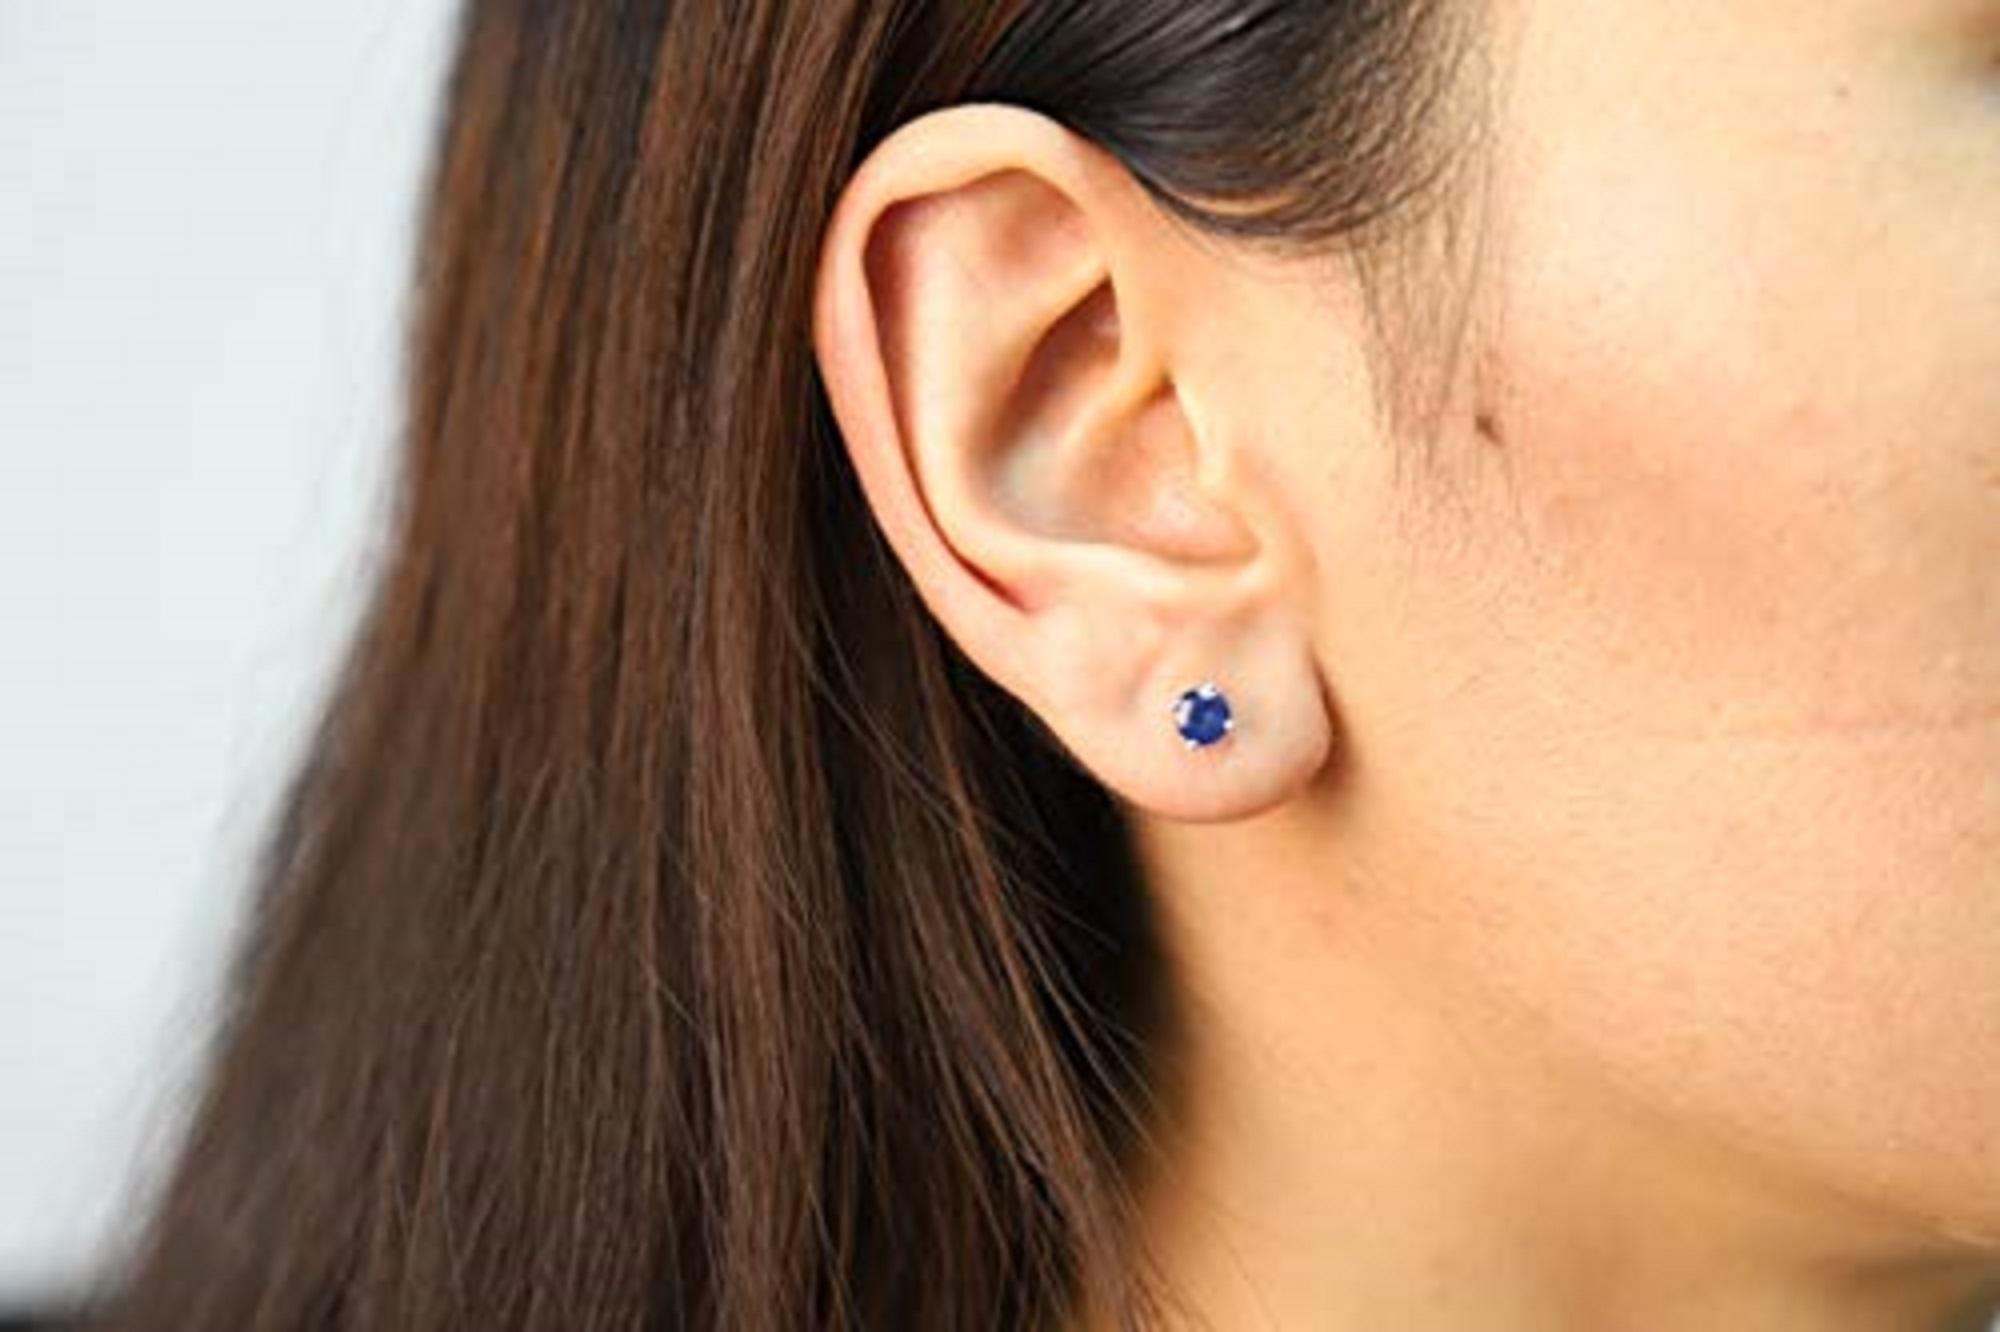 Decorate yourself in elegance with this Earring is crafted from 14K White Gold by Gin & Grace Earring. The jewelry boasts 5MM Round-Cut prong setting Blue color Blue Sapphire (2 pcs) 1.24 Carat. This Earring is weight 0.82 grams. This delicate